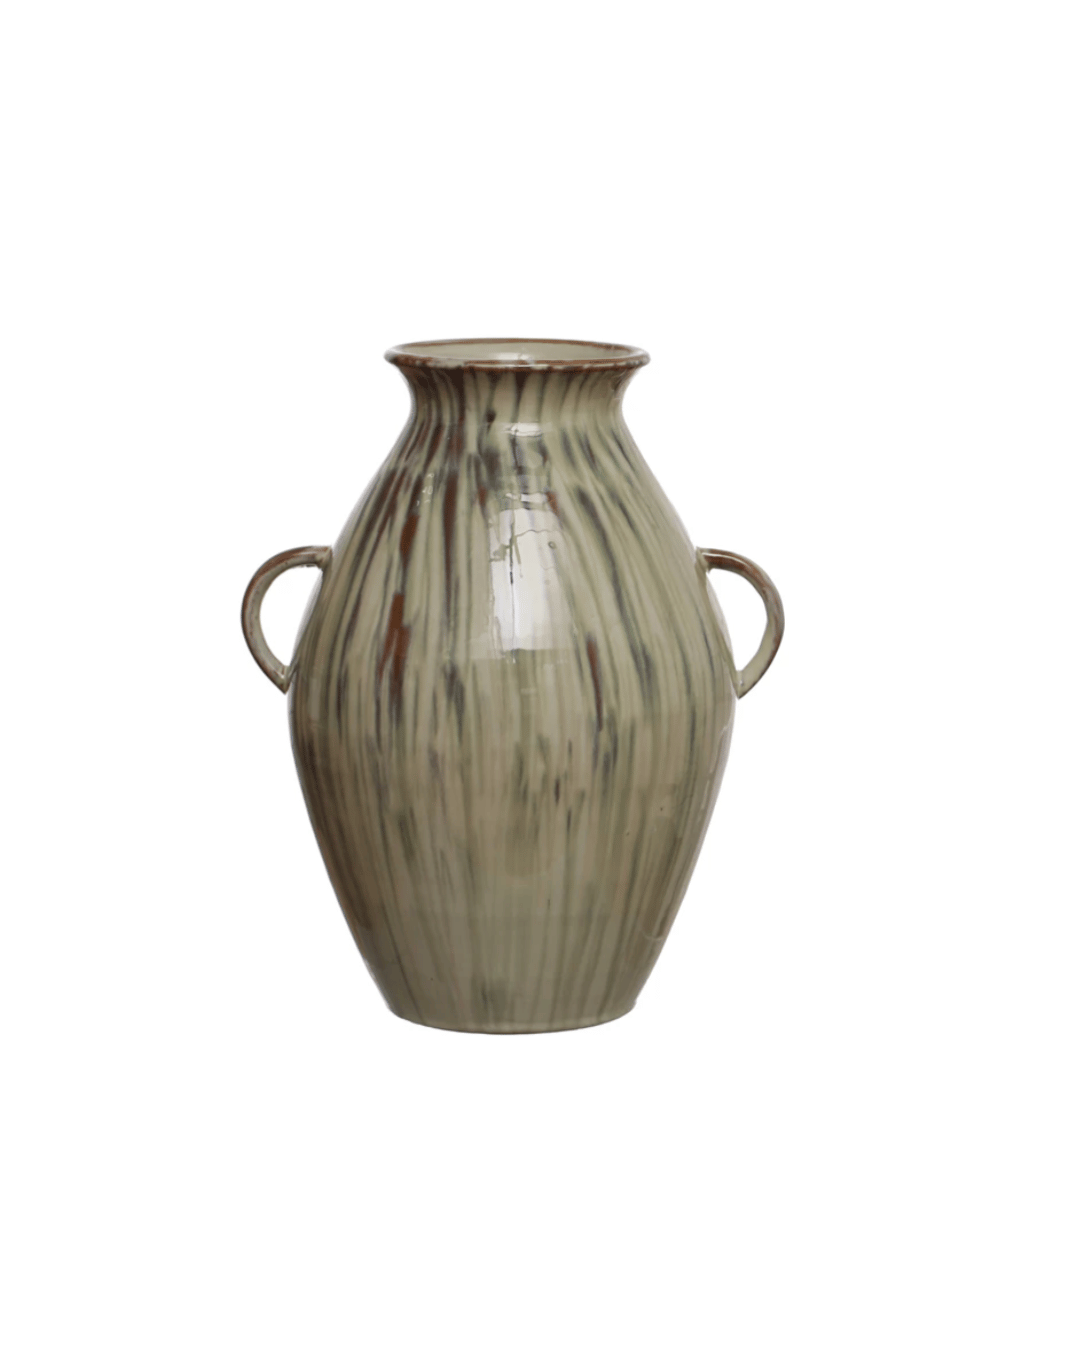 An elegant stoneware vase with a smooth, elongated body and a narrow neck, featuring streaks of green and brown glaze, reminiscent of the natural tones found in Scottsdale, Arizona. It has two small handles near the top, set against a plain white background by Creative Co-op.